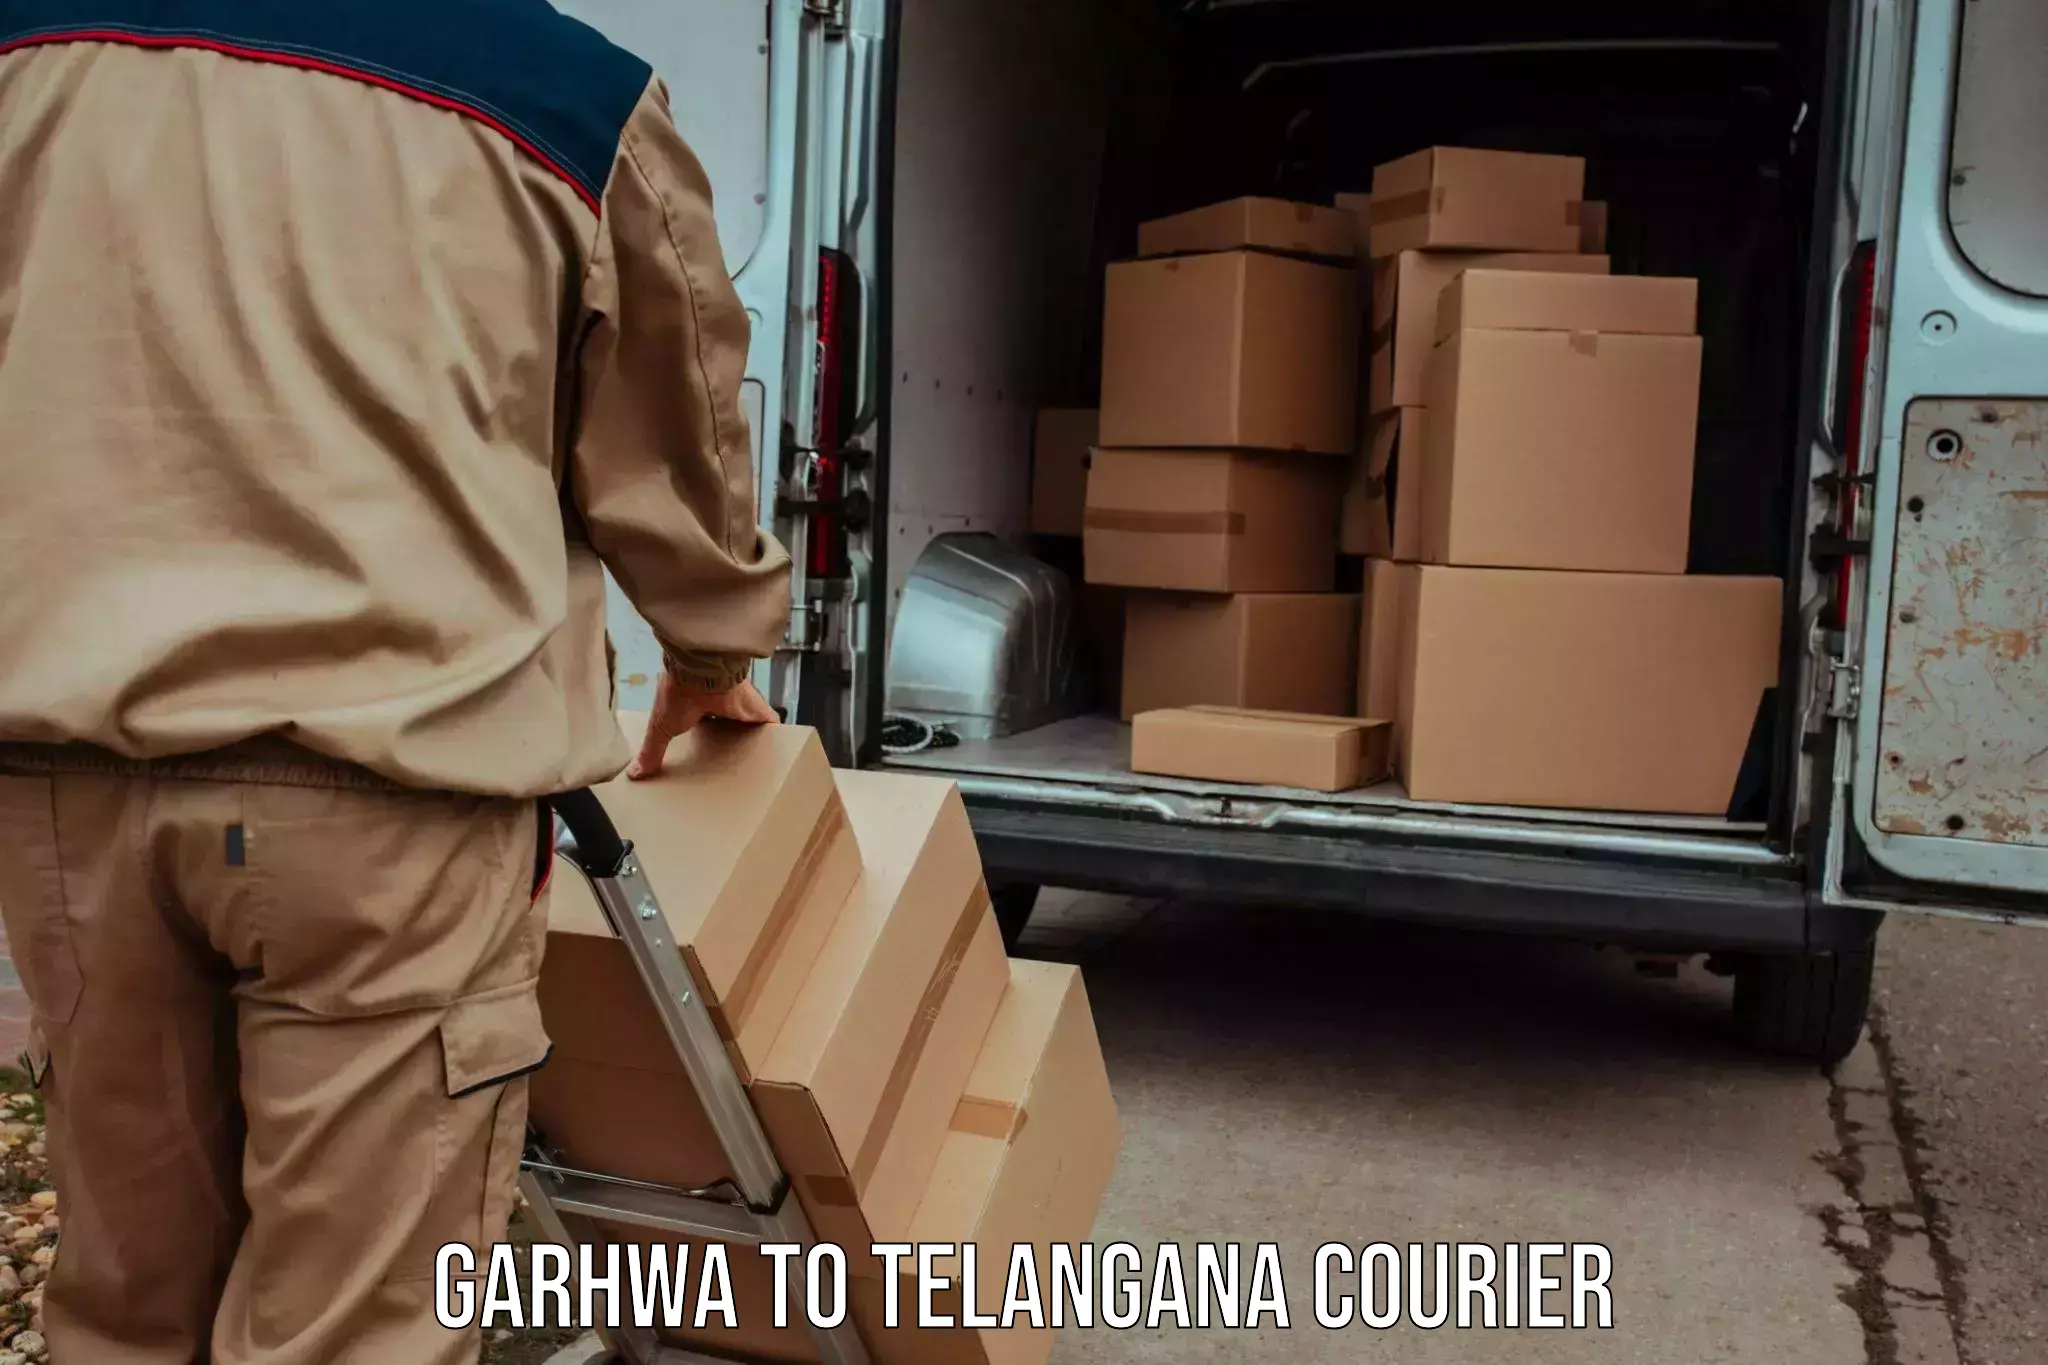 Next-day freight services in Garhwa to Secunderabad